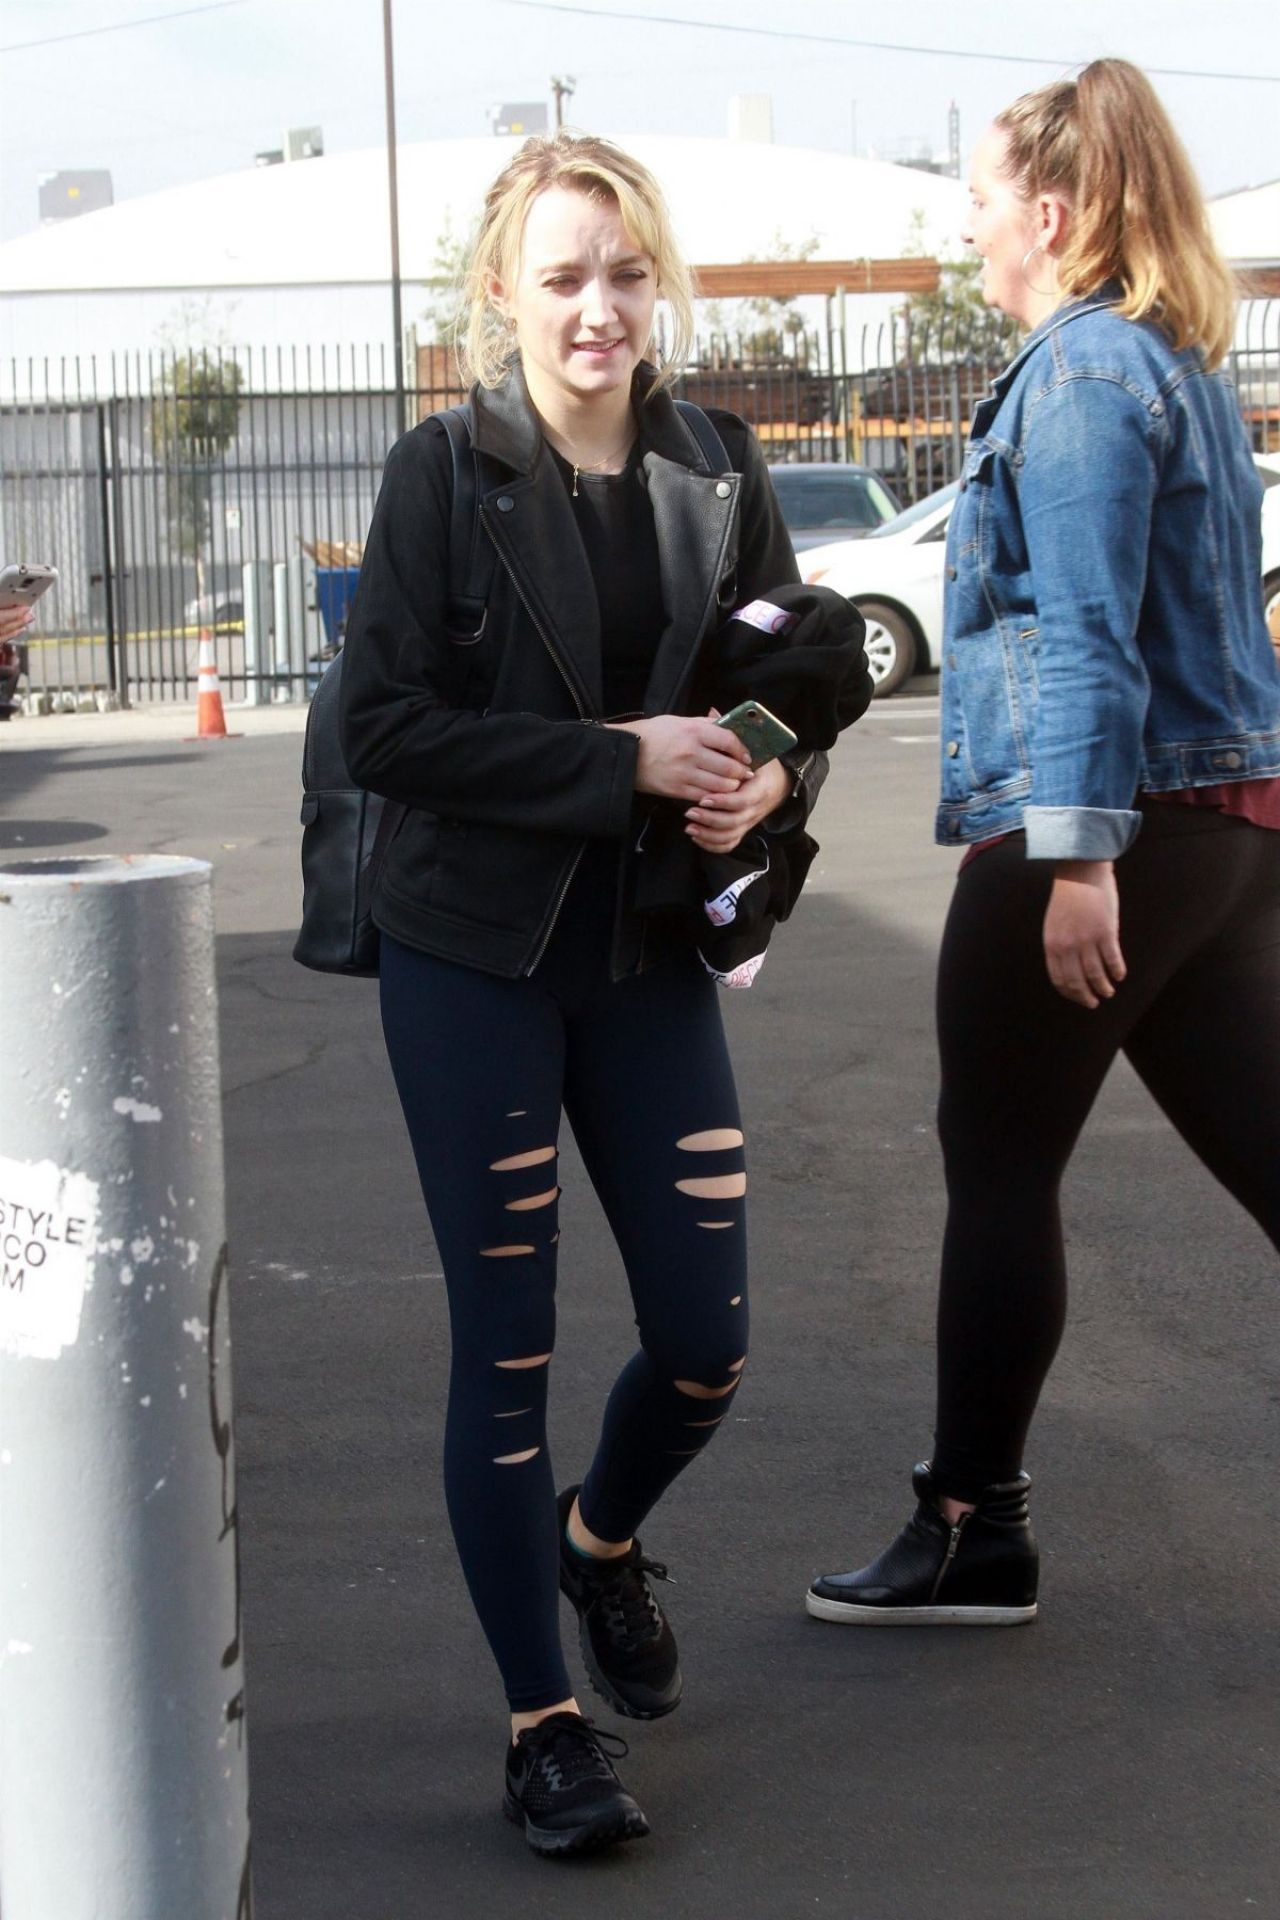 evanna-lynch-arrives-for-practice-at-dwts-studio-in-la-11-17-2018-0.jpg